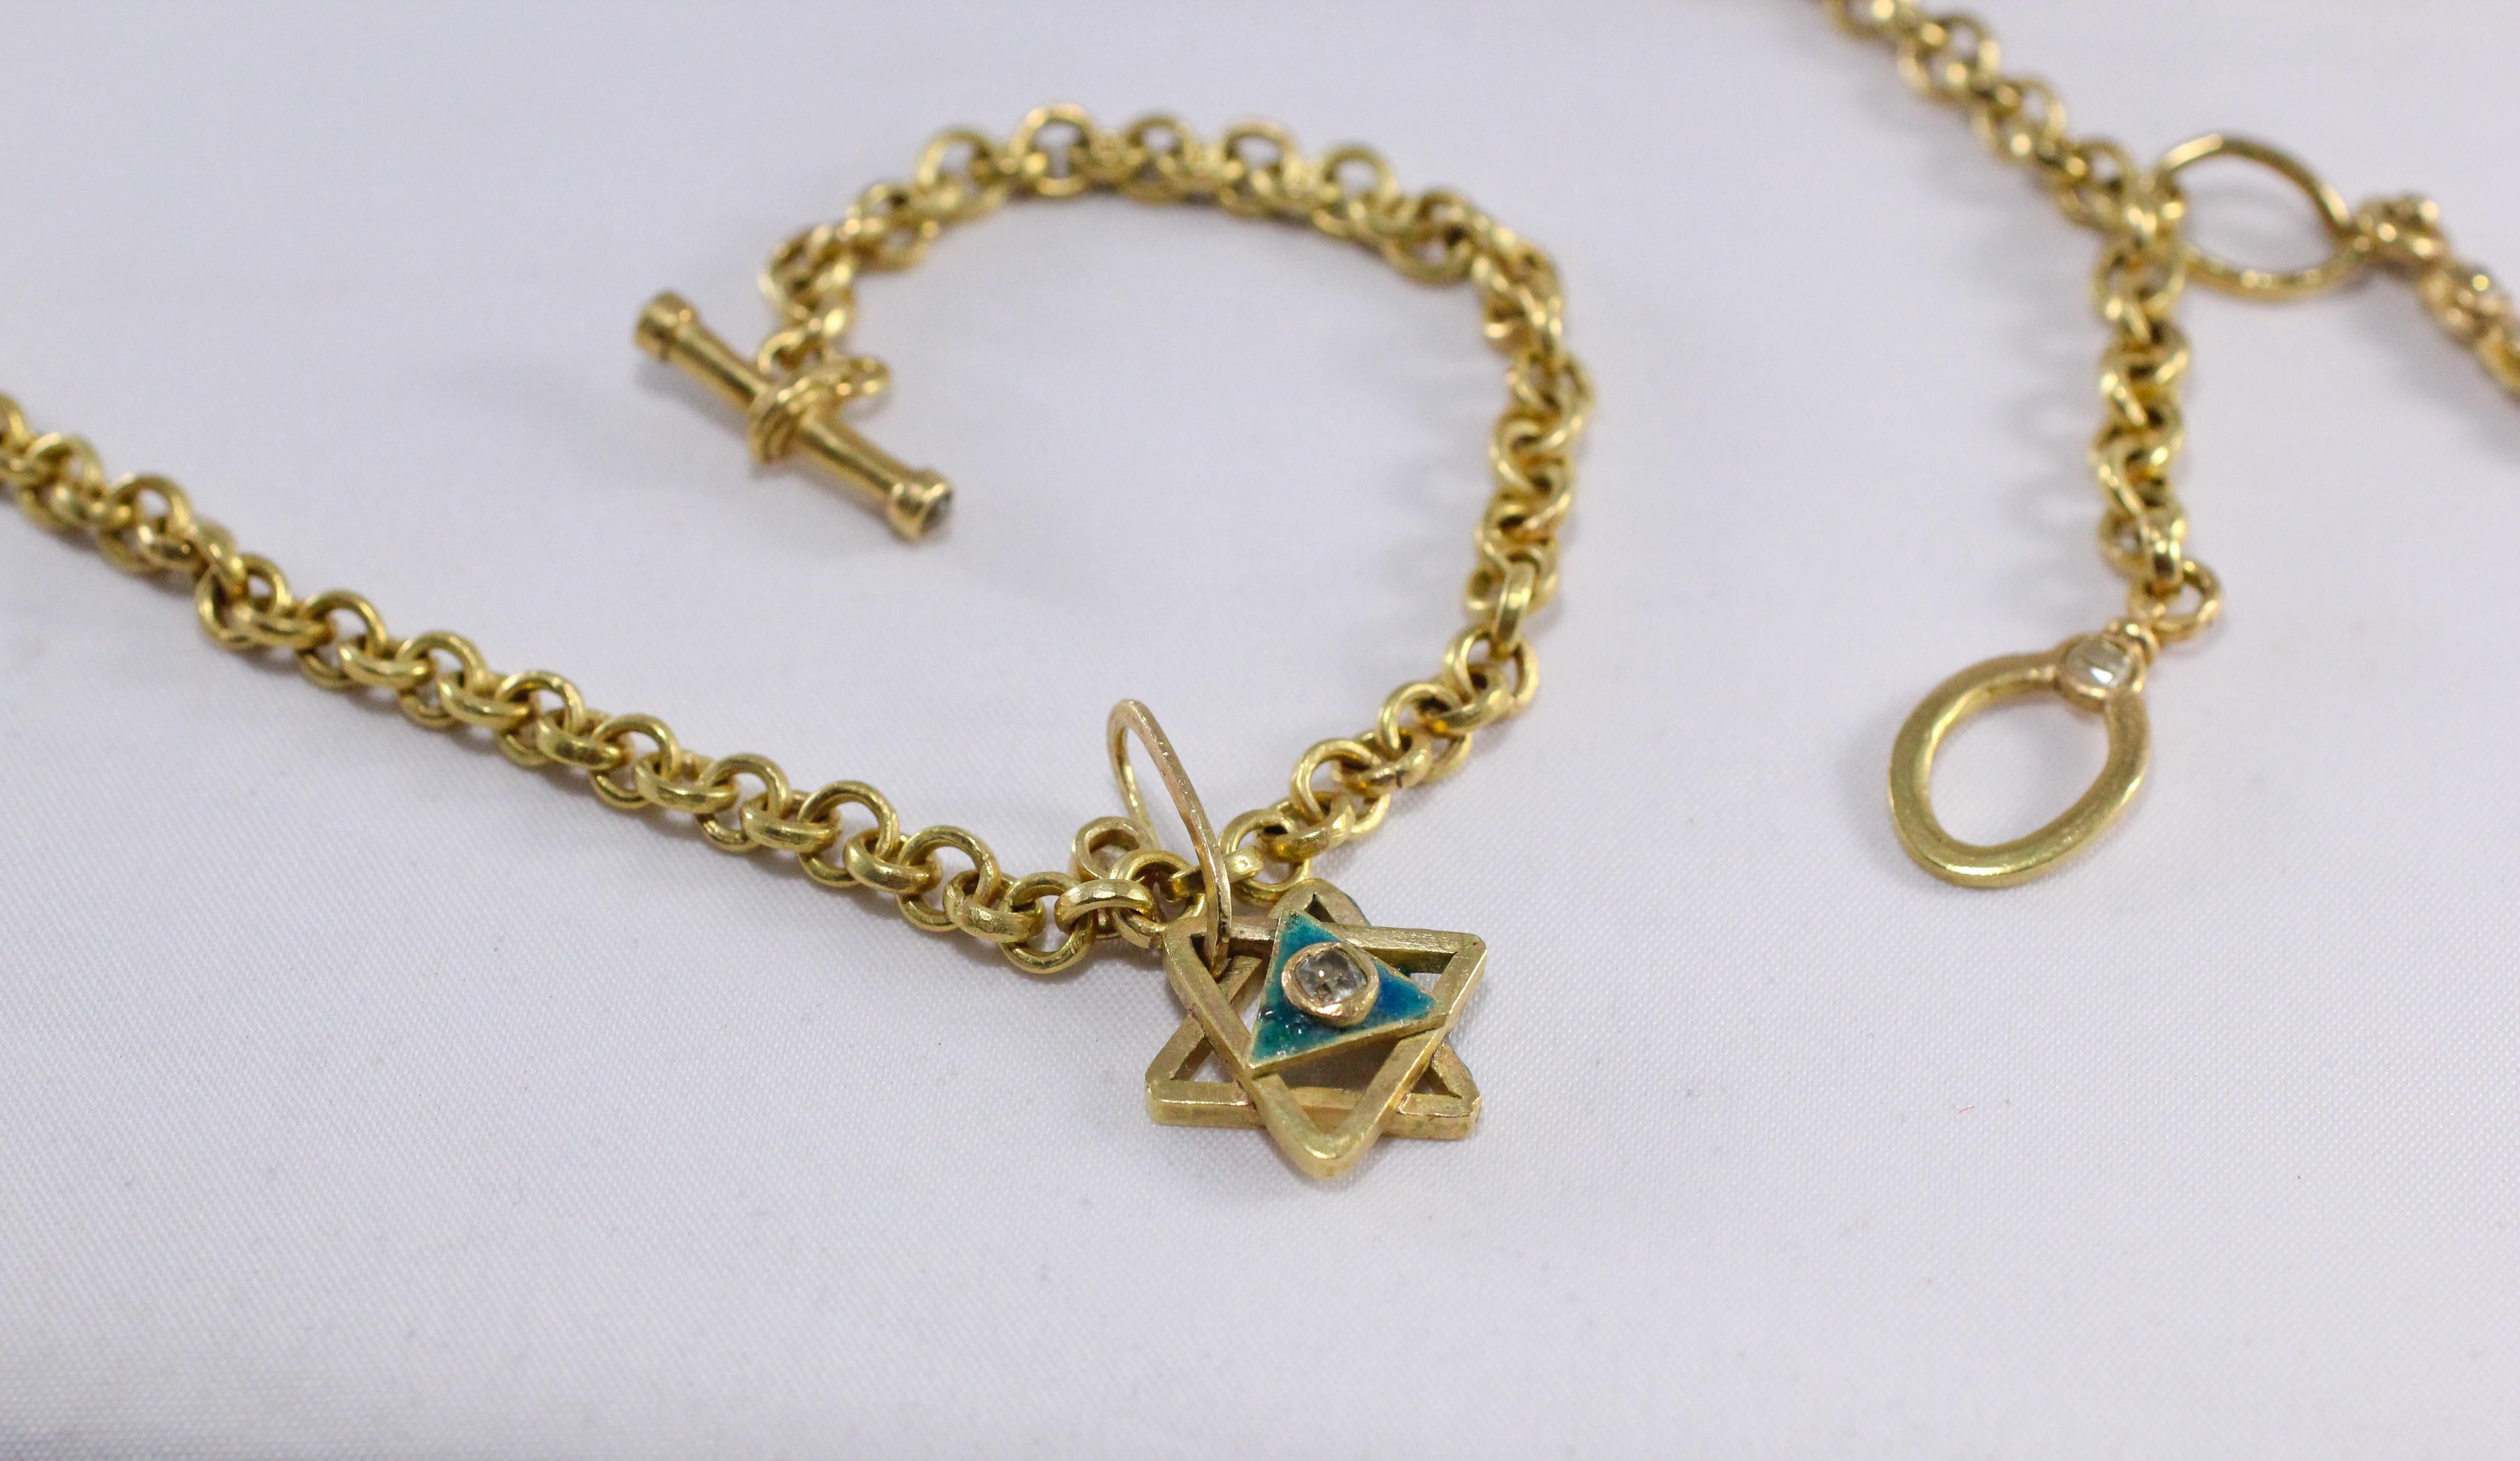 An enameled Magen David on a hand-crafted drop link necklace with a diamond enhancer. All are in recycled 18K gold. A bold symbol of faith and spirit this beautiful Magen David is hand fabricated, enameled in colors of Eilat or King Solomon Stone,